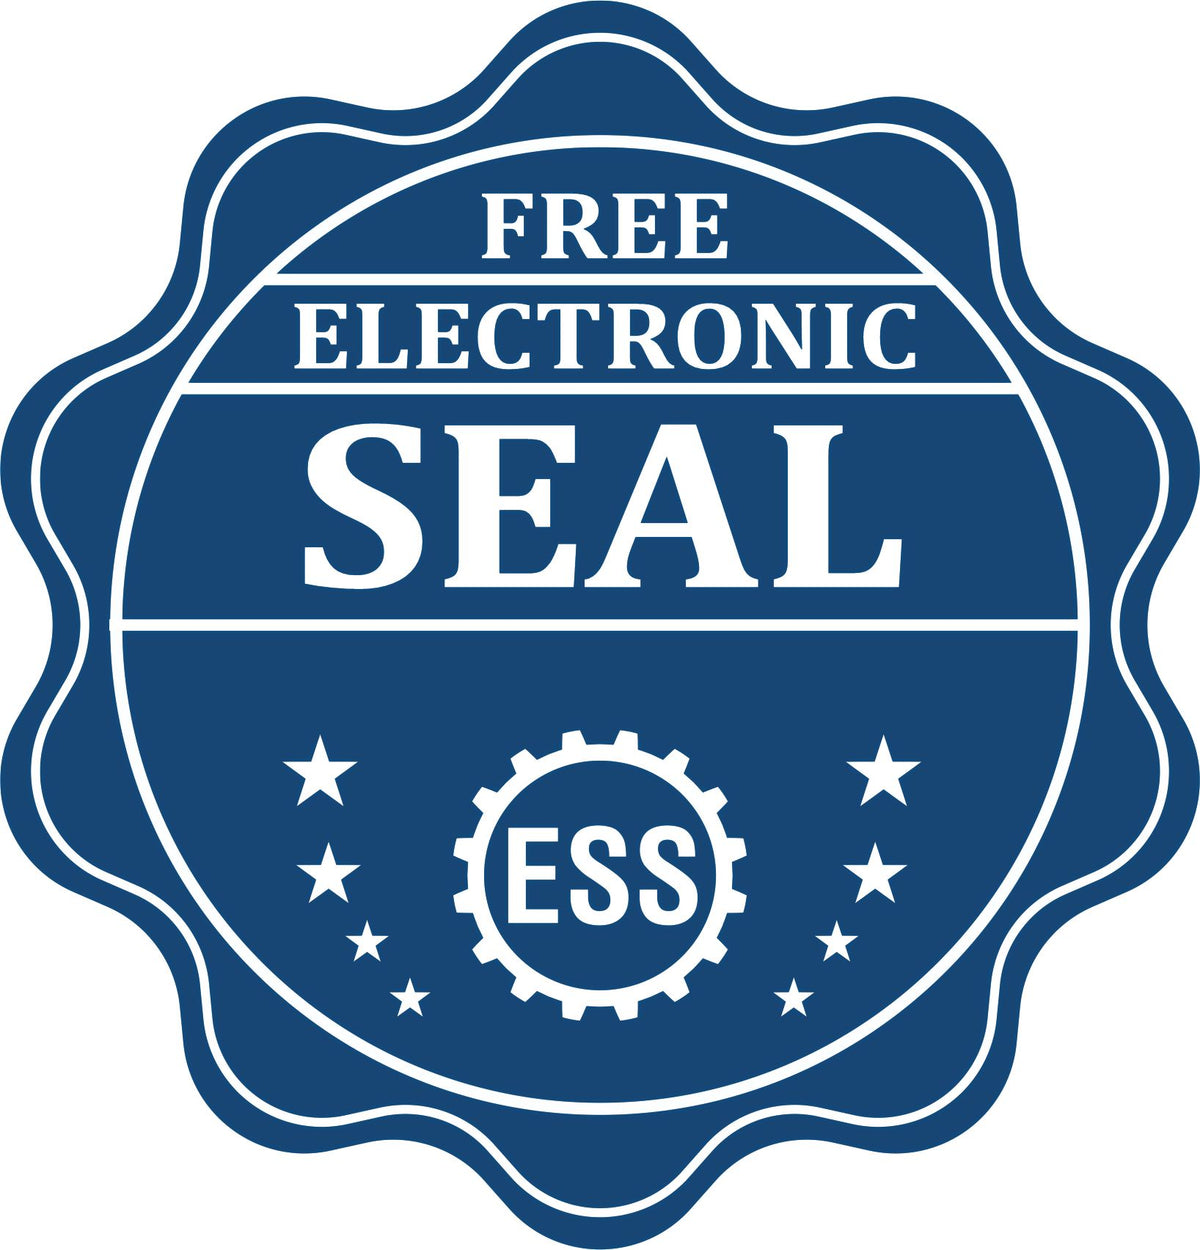 A badge showing a free electronic seal for the Heavy-Duty Missouri Rectangular Notary Stamp with stars and the ESS gear on the emblem.